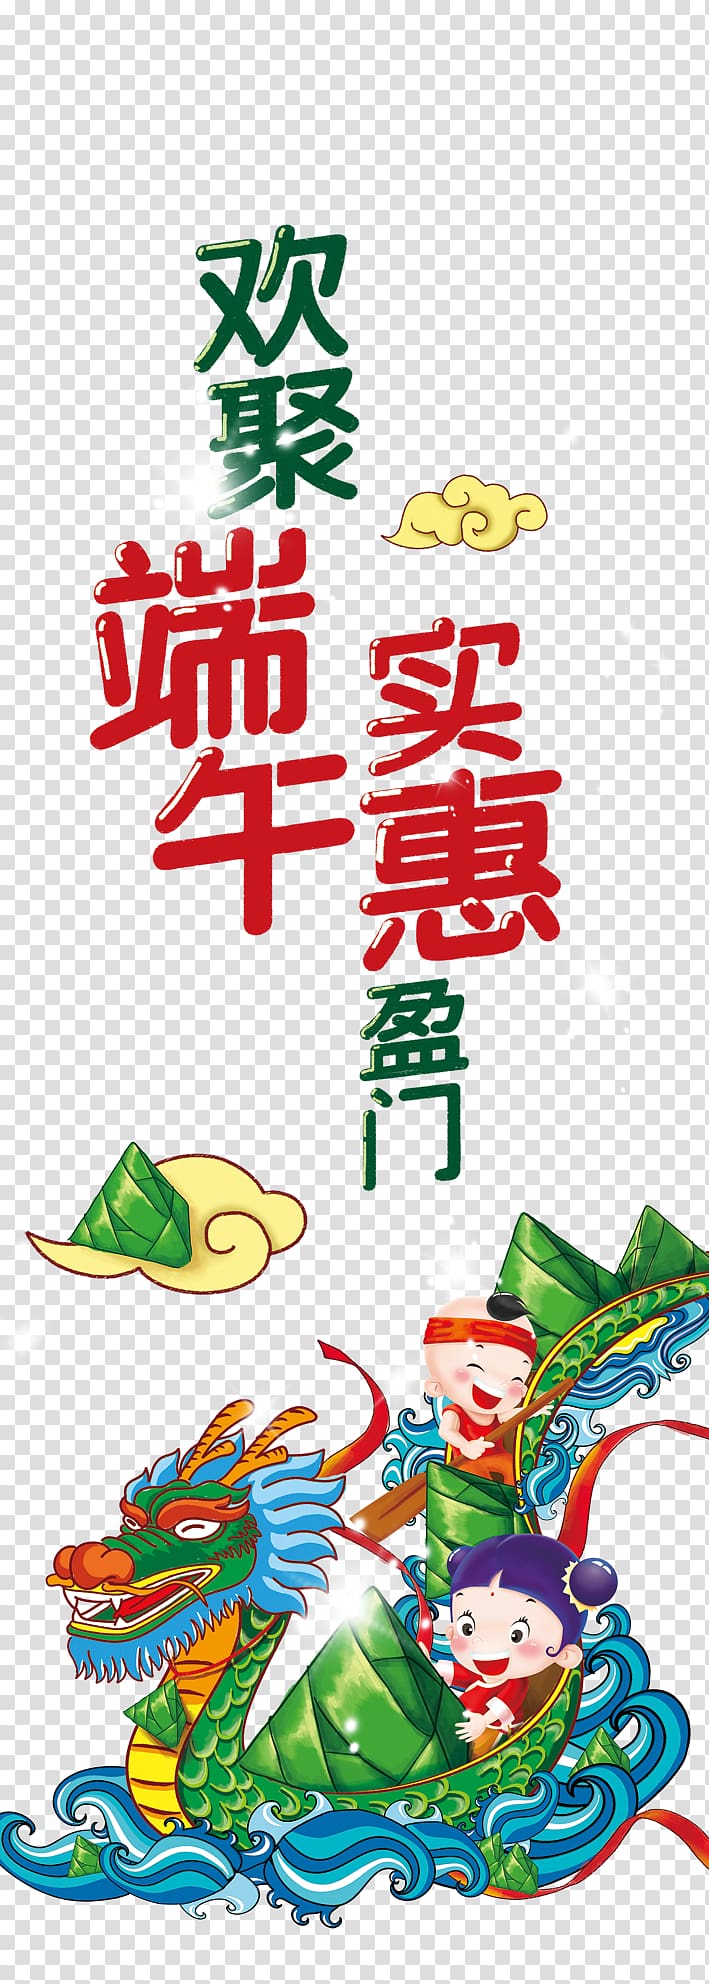 green Chinese dragon with text overlay illustratio n, Dragon Boat Festival Cartoon , Dragon Boat Festival material transparent background PNG clipart